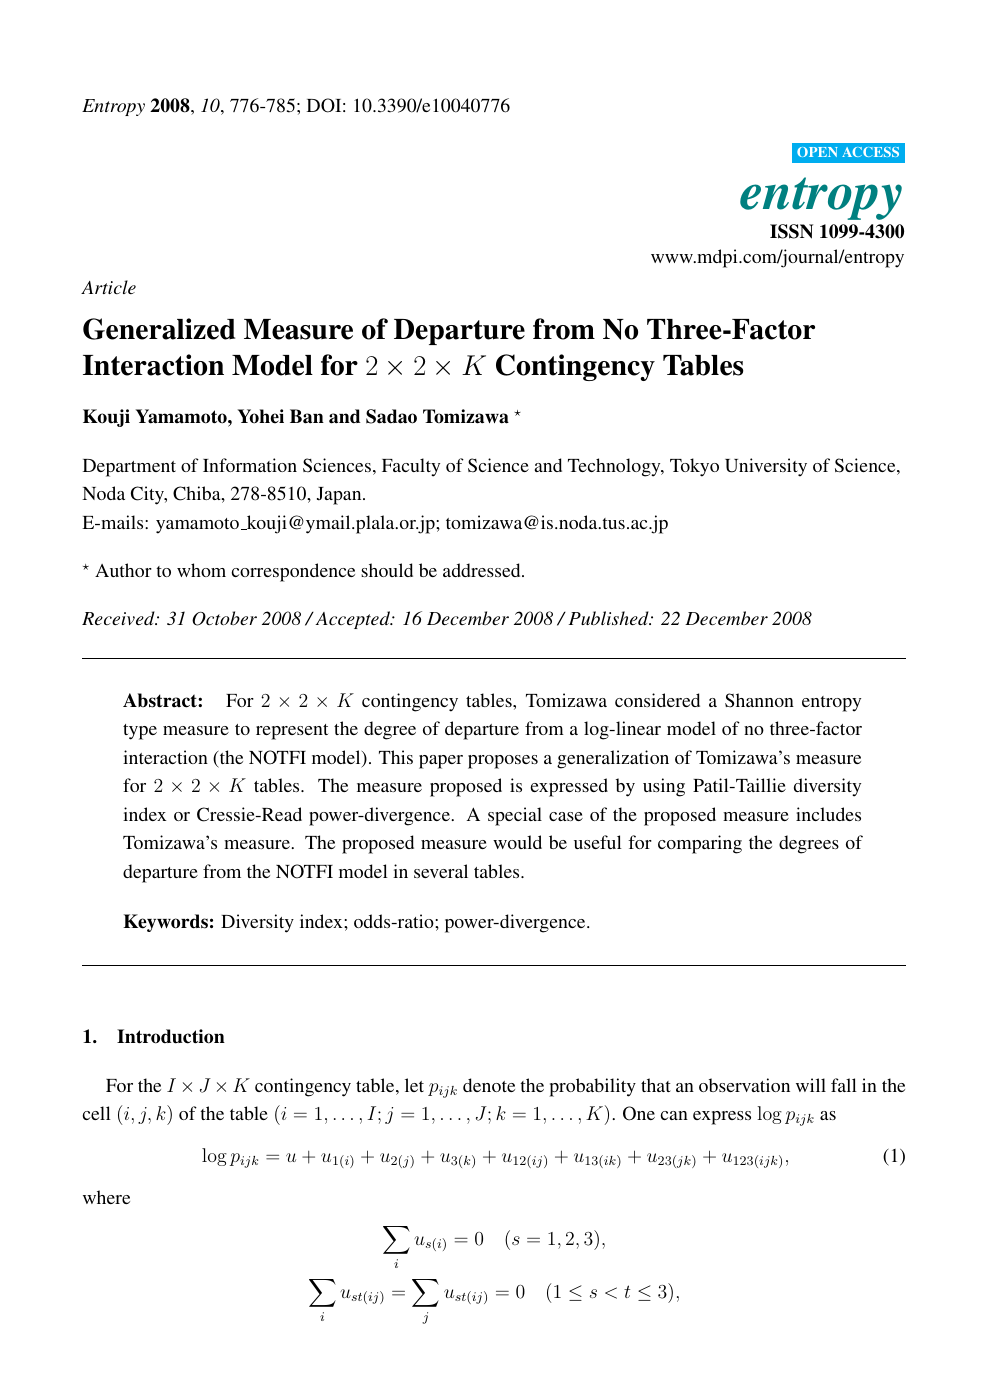 Generalized Measure Of Departure From No Three Factor Interaction Model For 2 X 2 X K Contingency Tables Topic Of Research Paper In Mathematics Download Scholarly Article Pdf And Read For Free